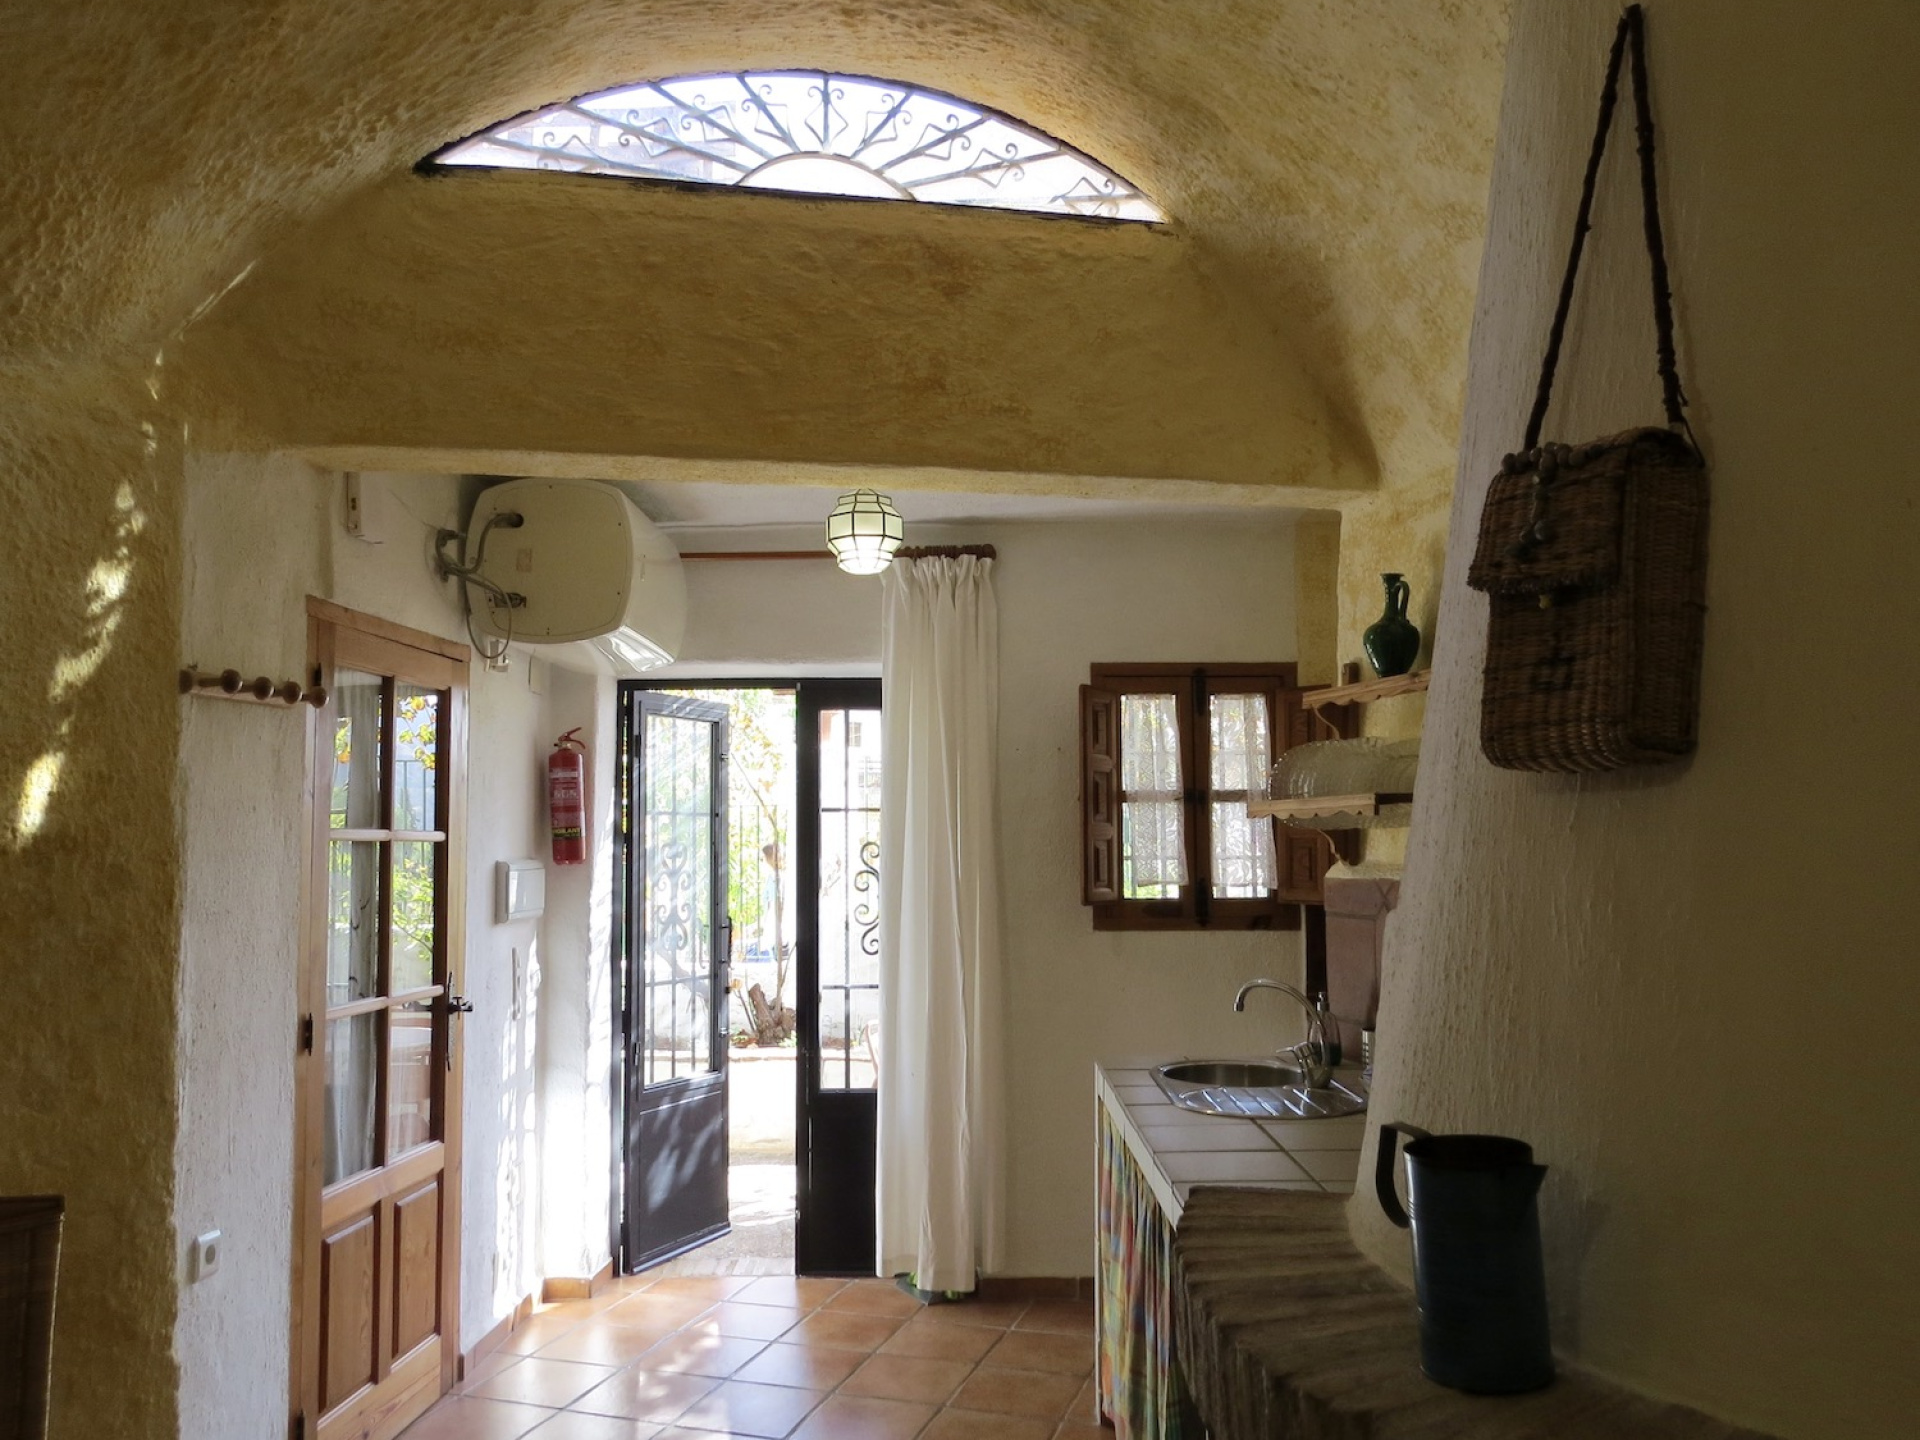 Holiday Lets & Owner Accommodation, Sacromonte